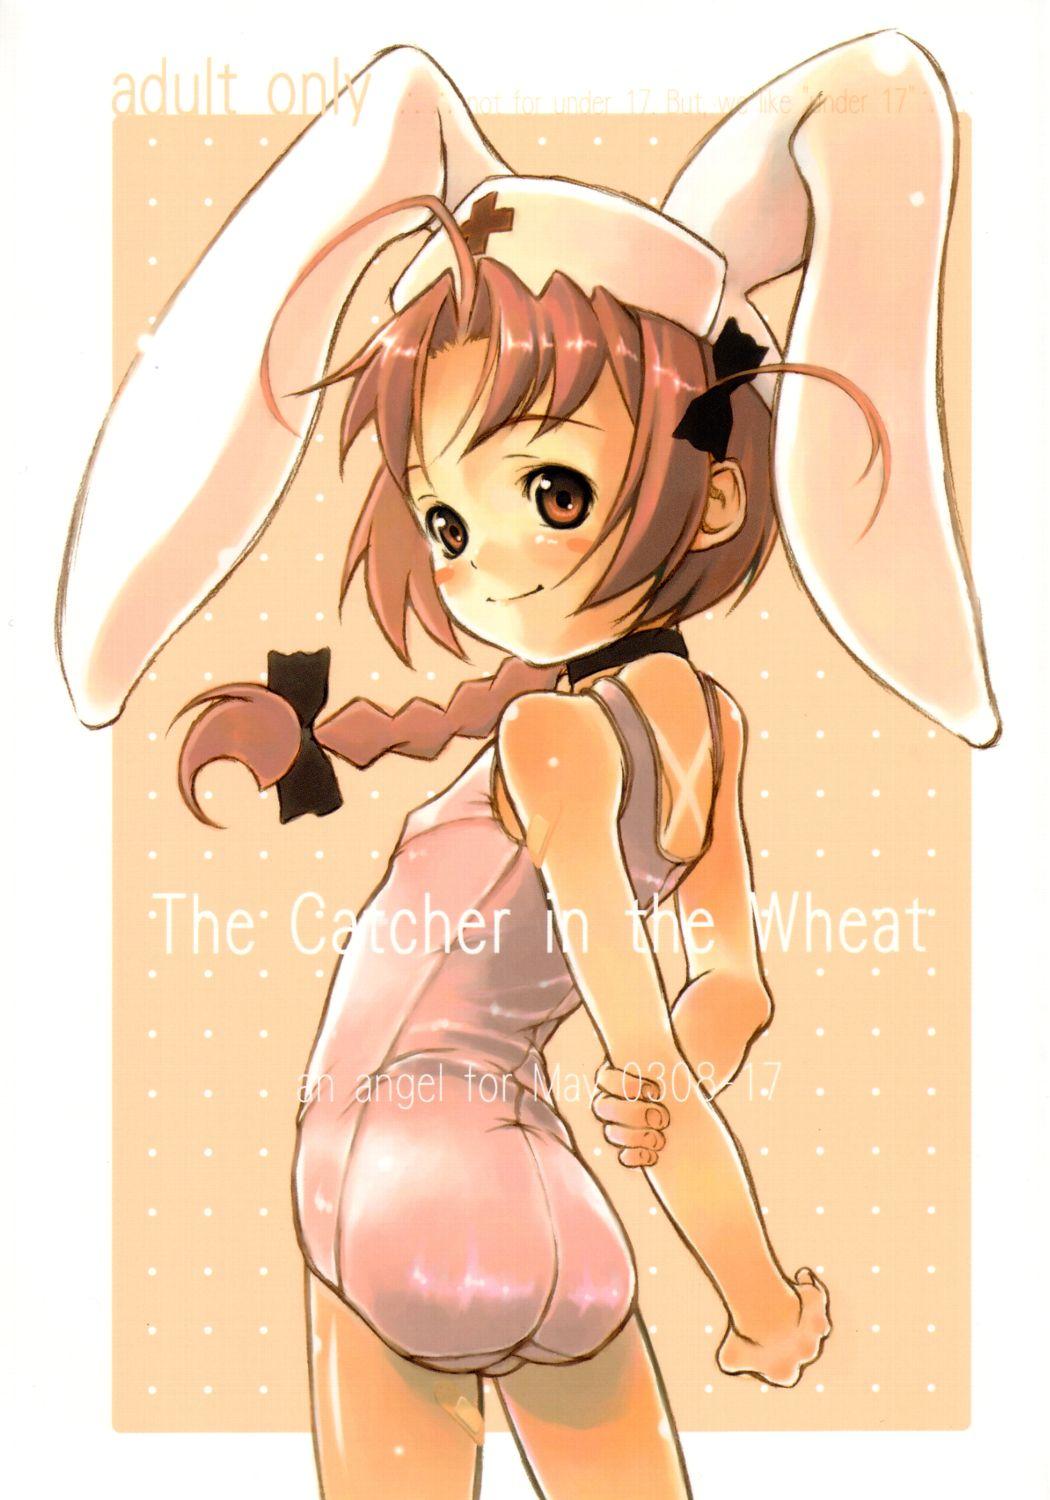 Soft The Catcher in the Wheat - Nurse witch komugi Adult Toys - Page 1